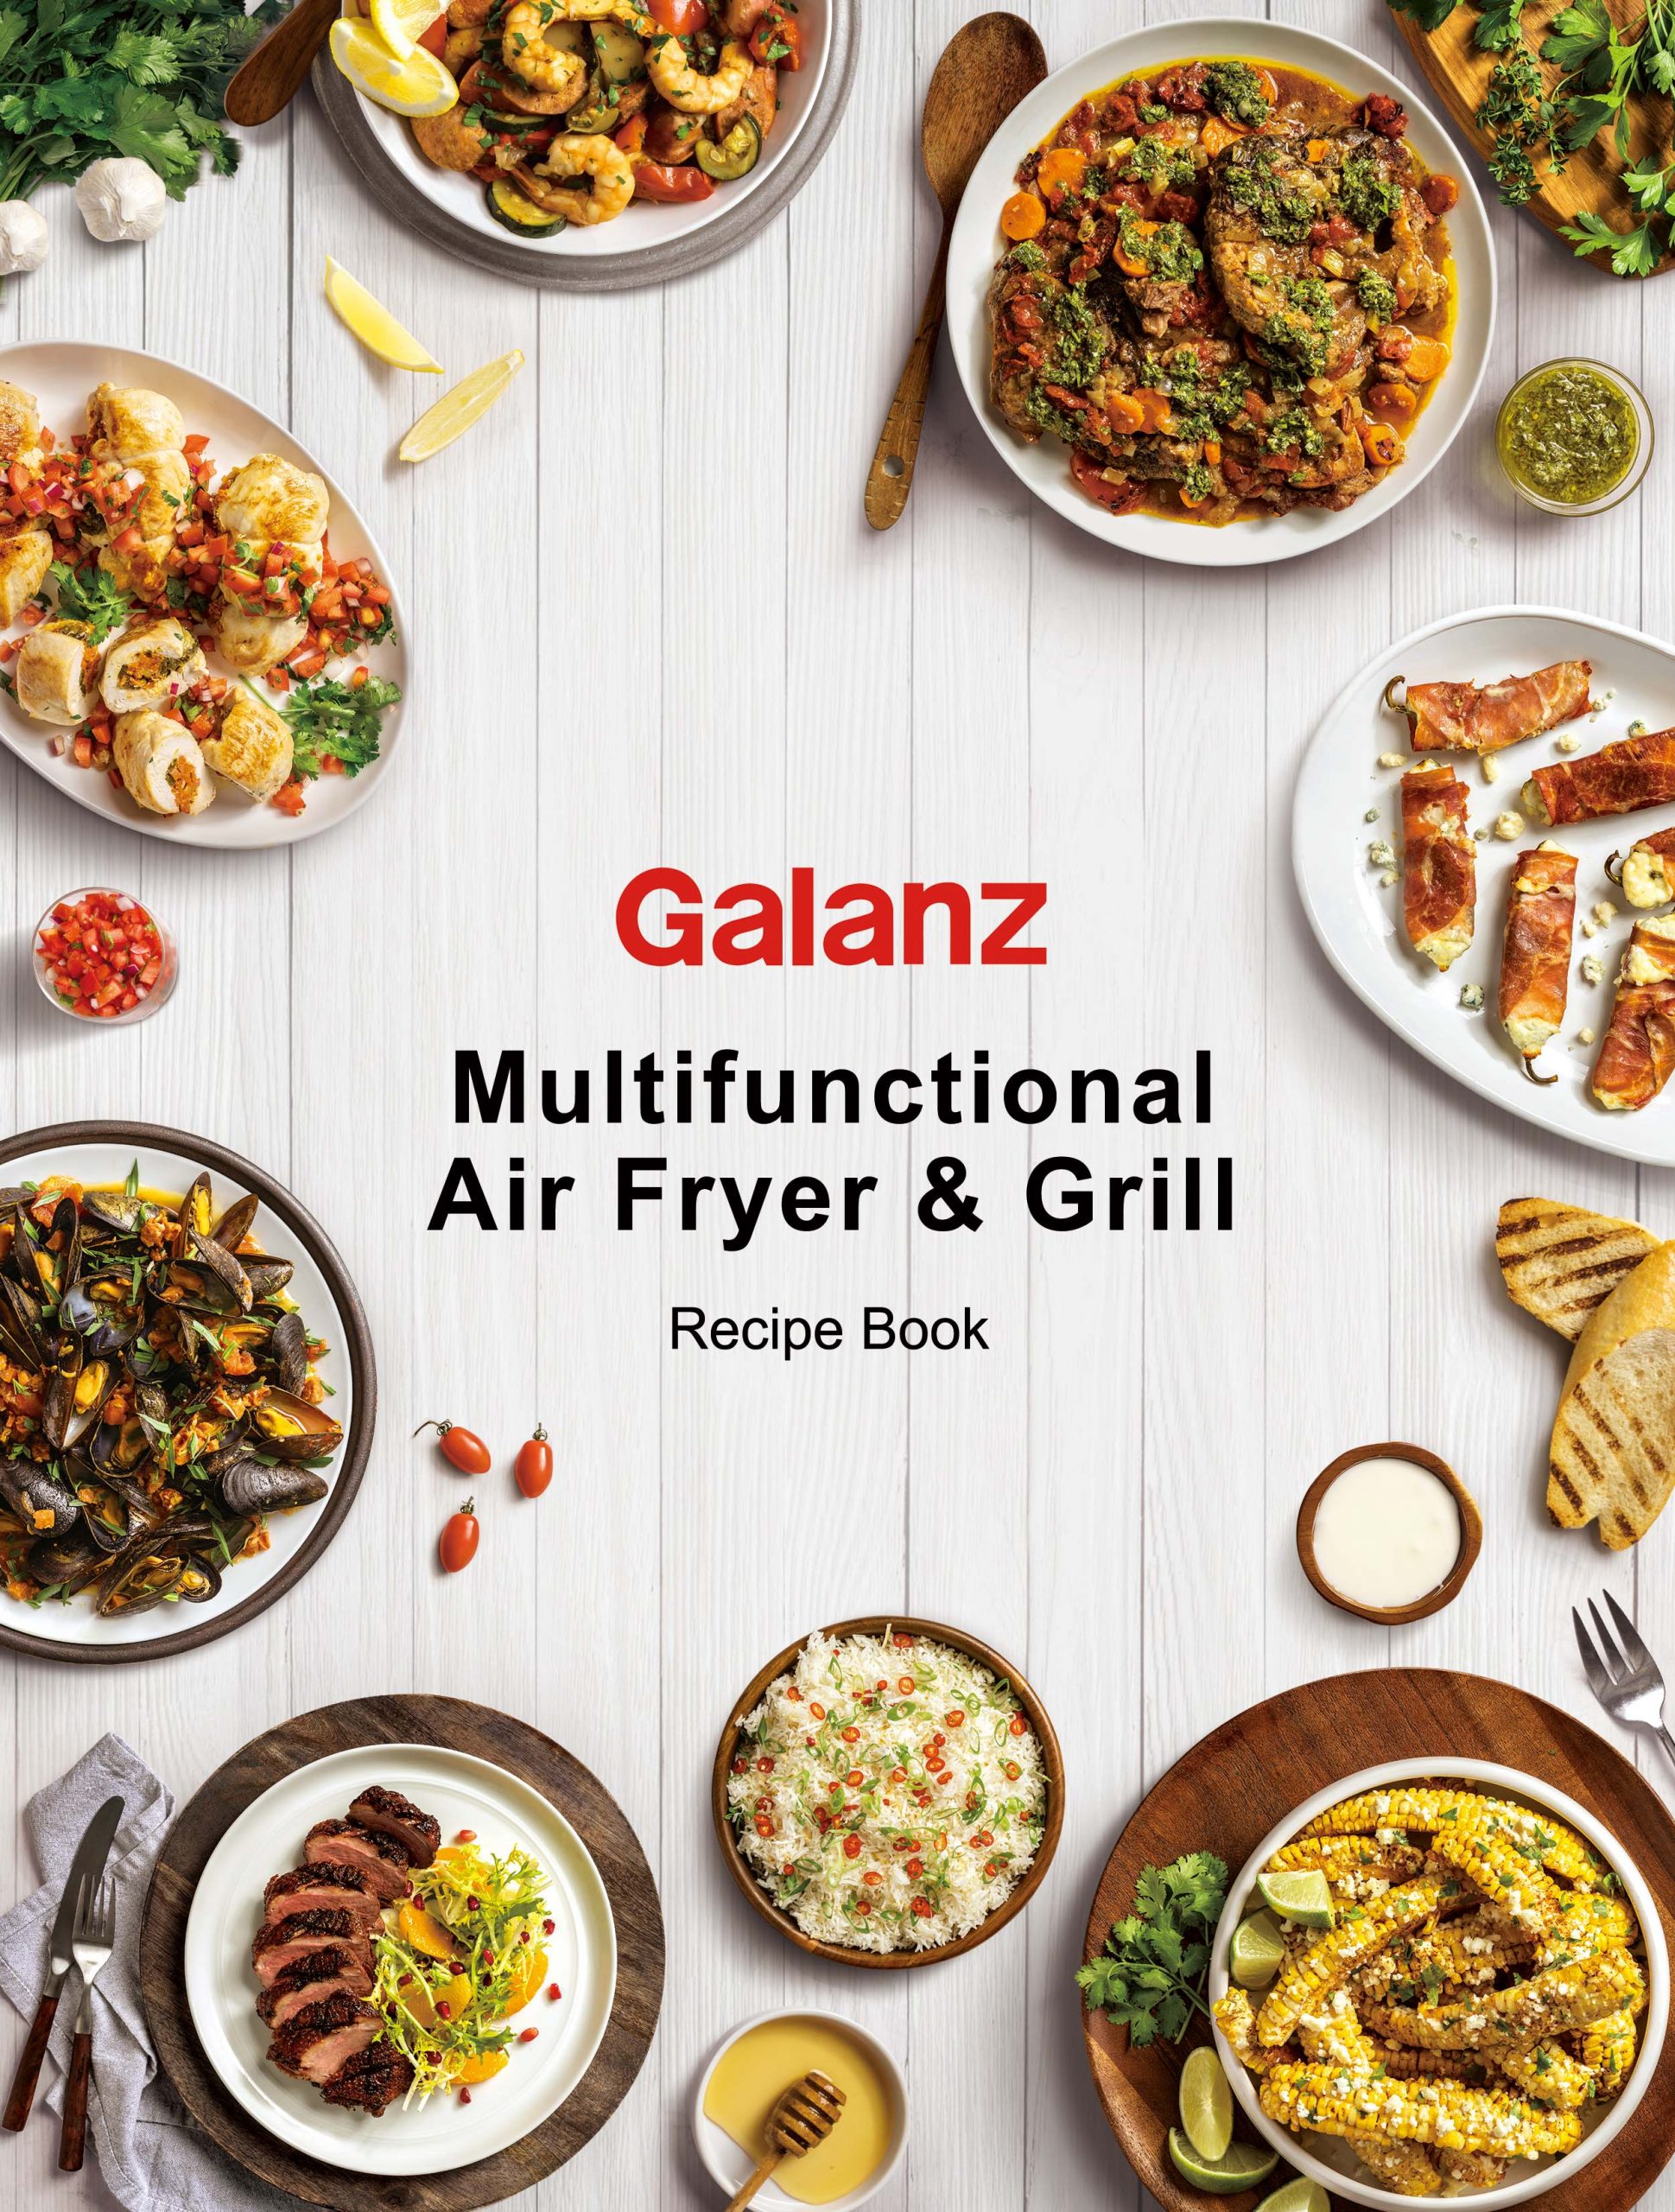 https://www.galanz.com/us/wp-content/uploads/2022/01/Multi-Cooker-15-Recipe-Cover-scaled.jpg